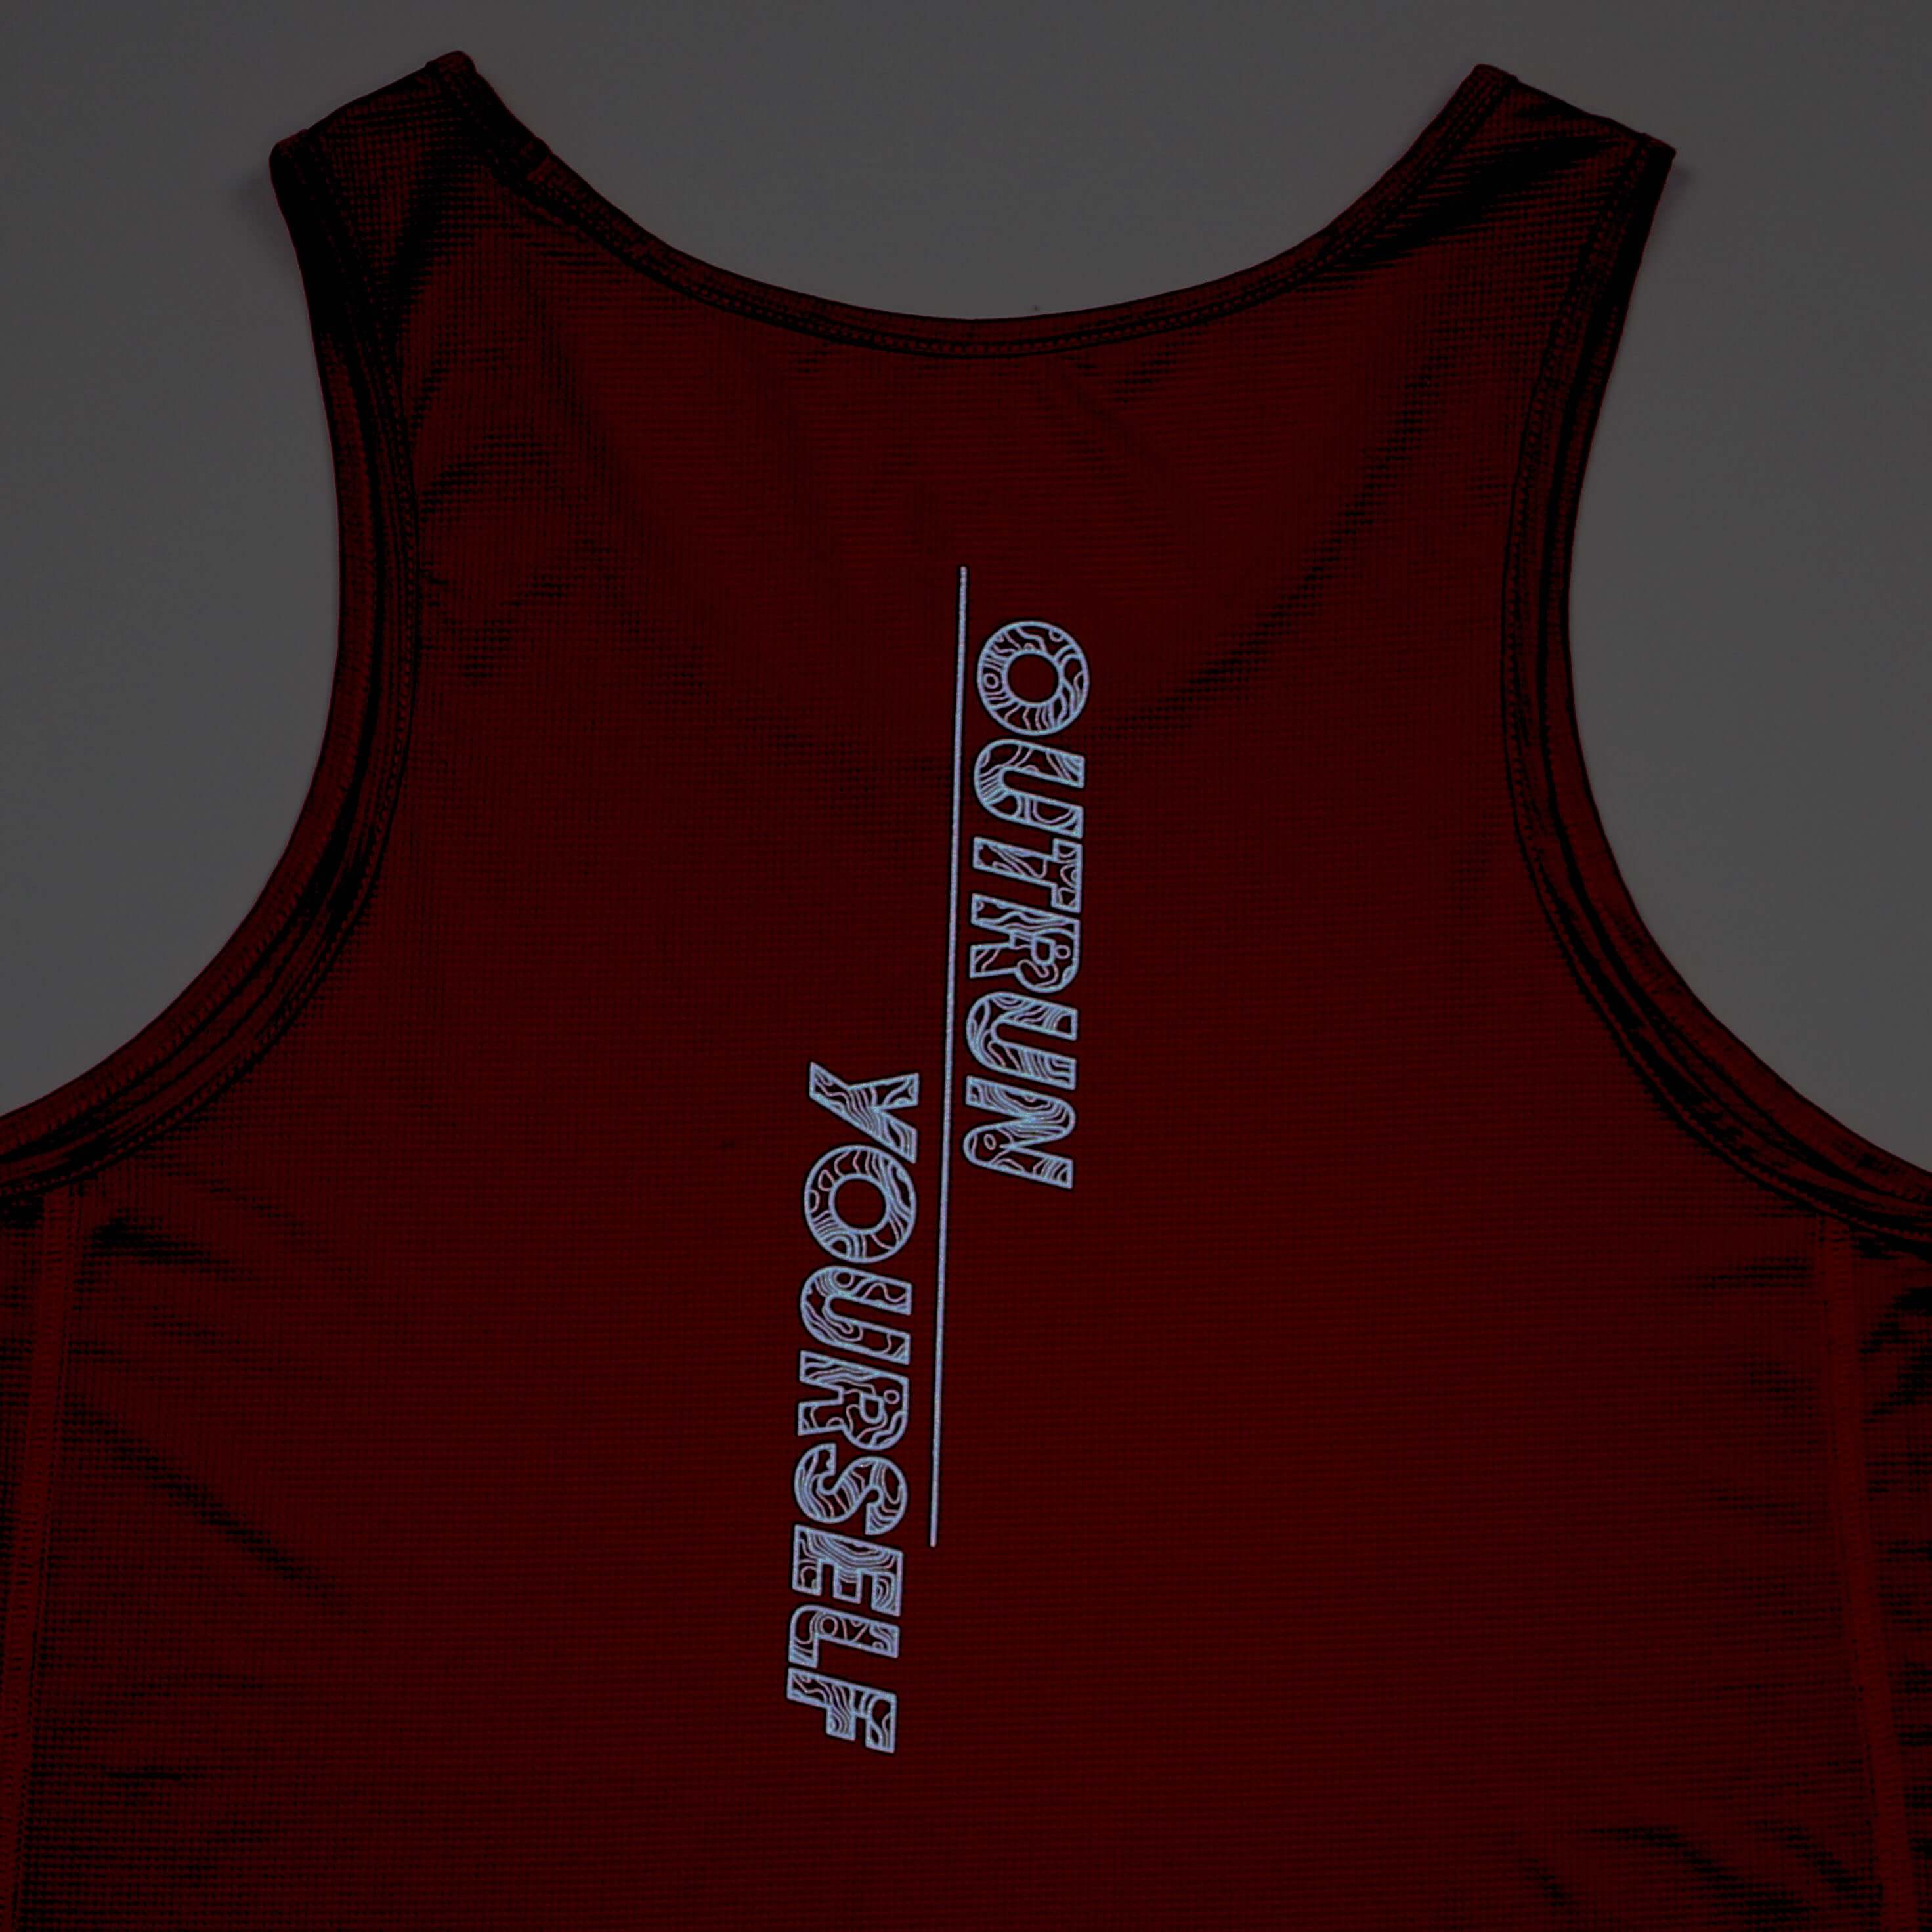 Running Singlet designed for high intensity workouts and racing. Lightweight and moisture-wicking made from Recycling Polyester.